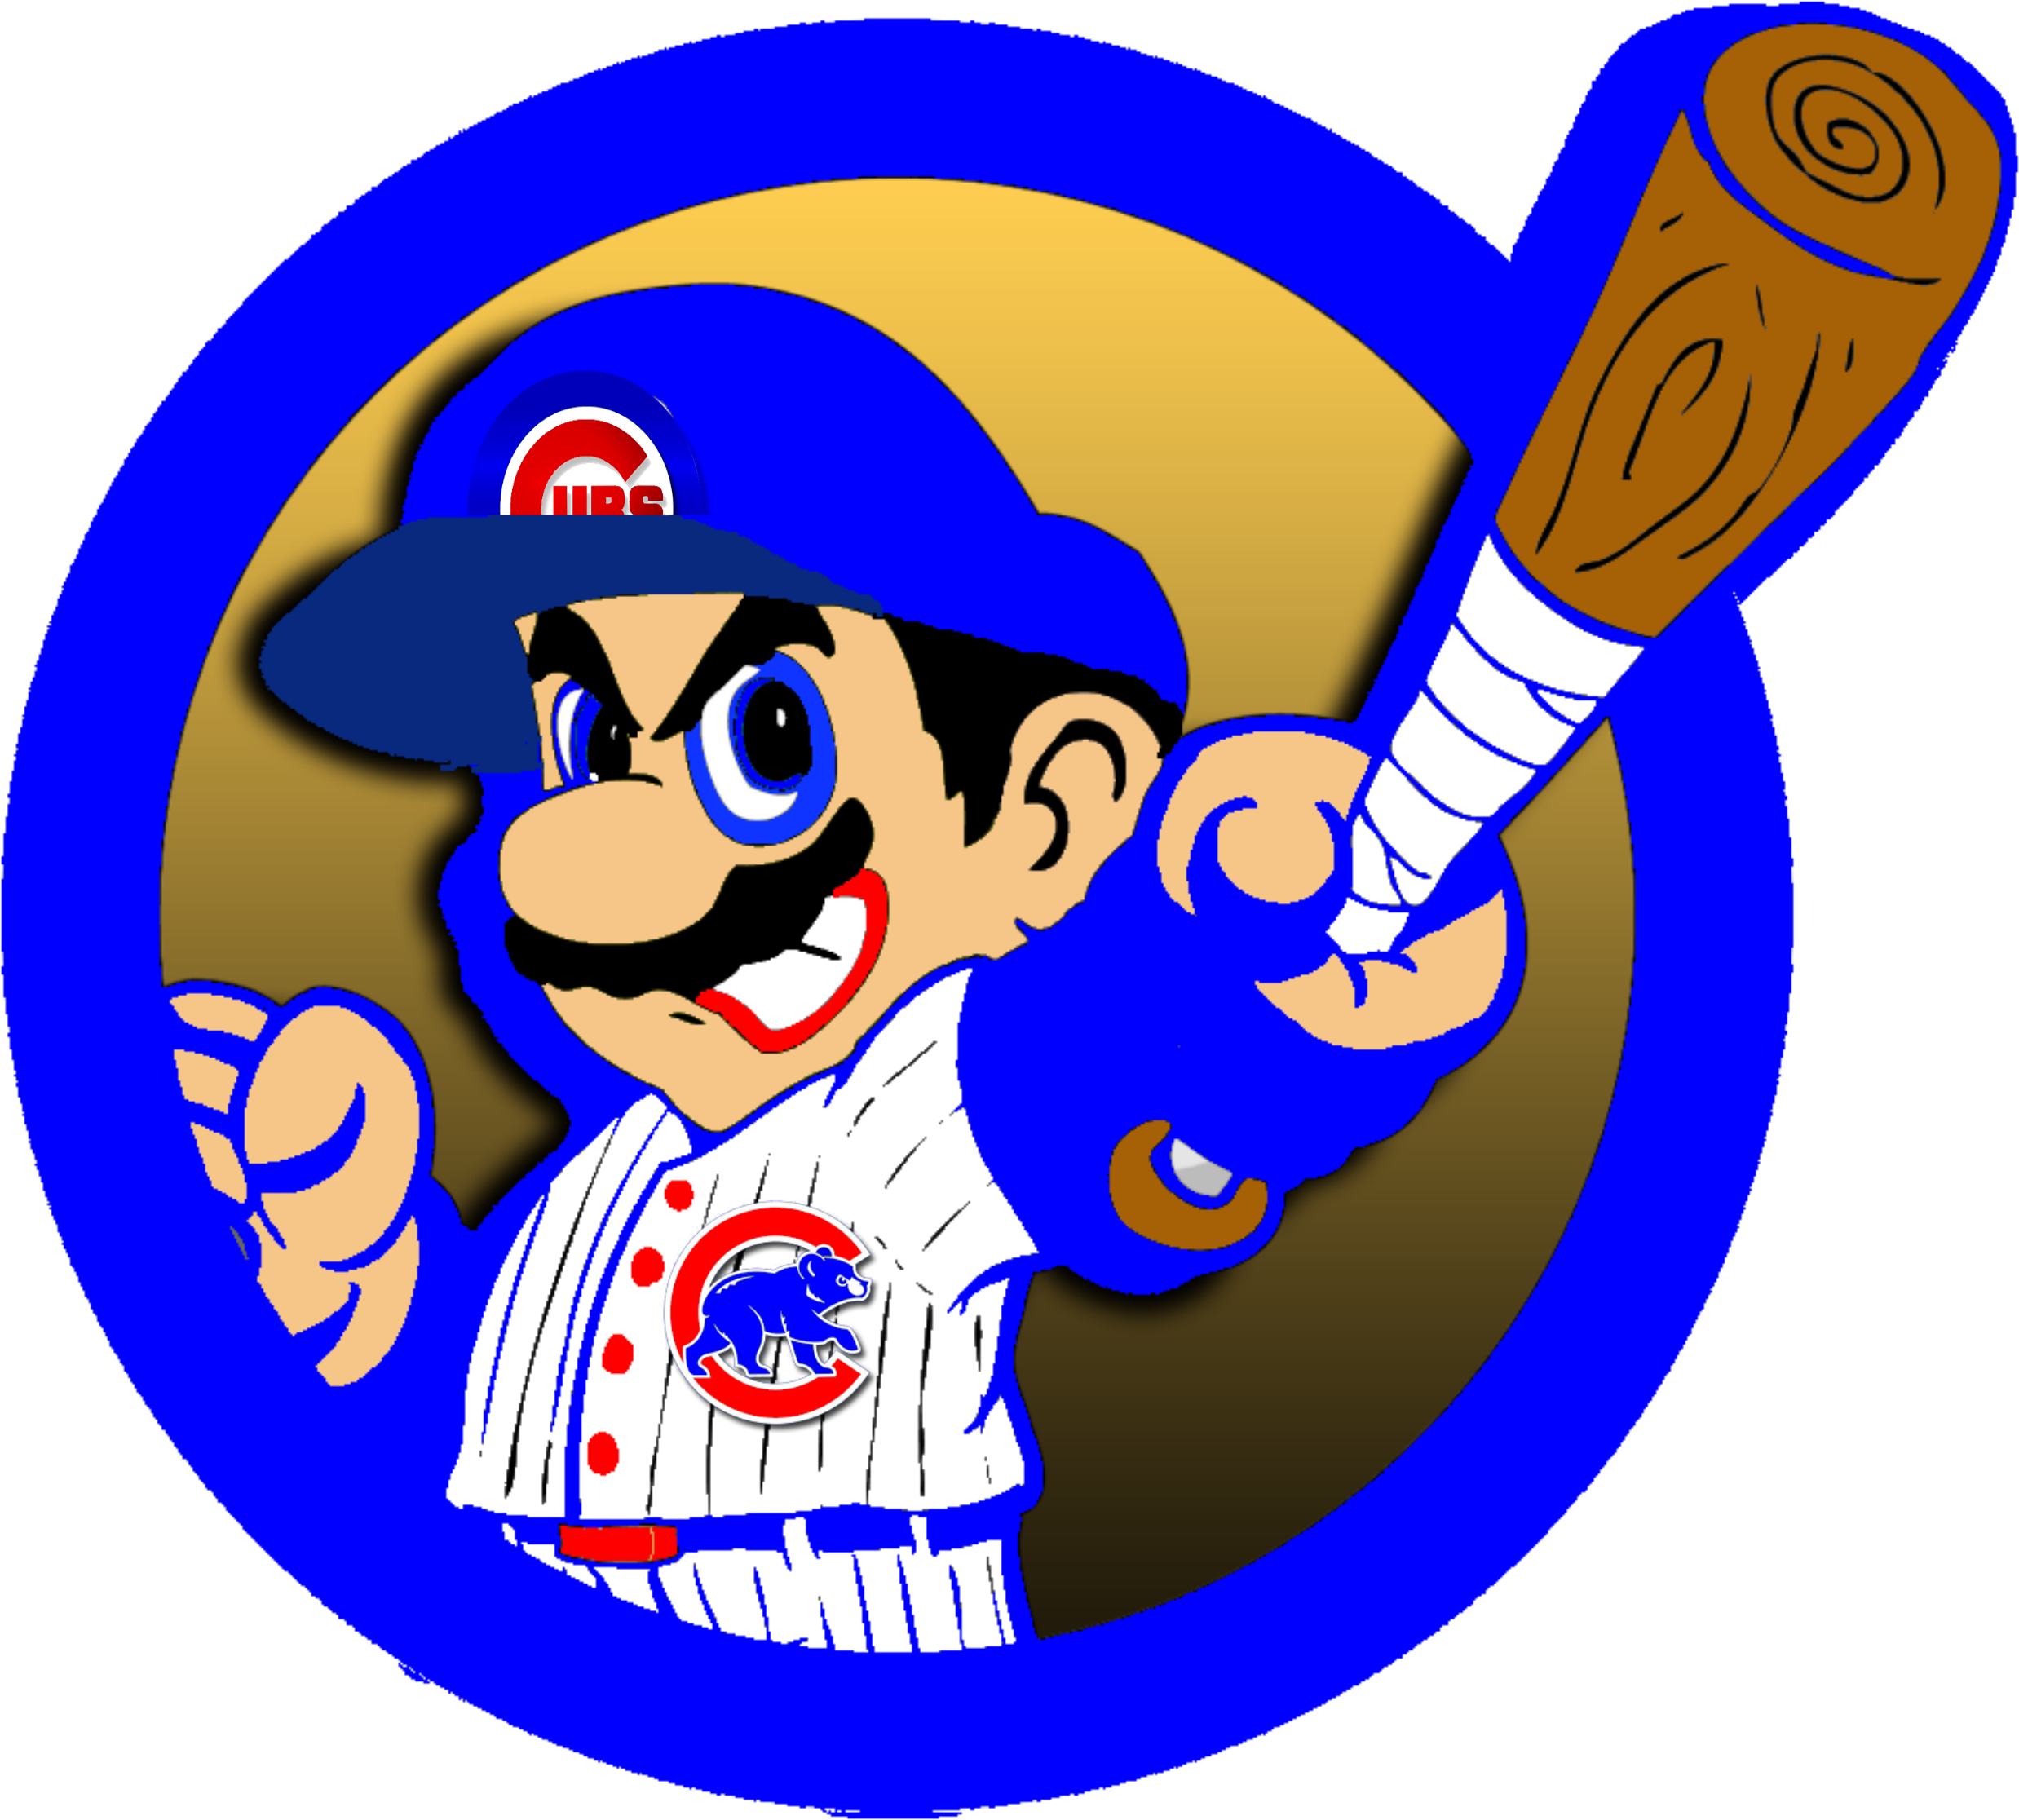 Chicago Cubs Baseball, Cubs Fan, Cubbies, Funny Things, - Chicago Cubs Baseball, Cubs Fan, Cubbies, Funny Things, (2500x2500)